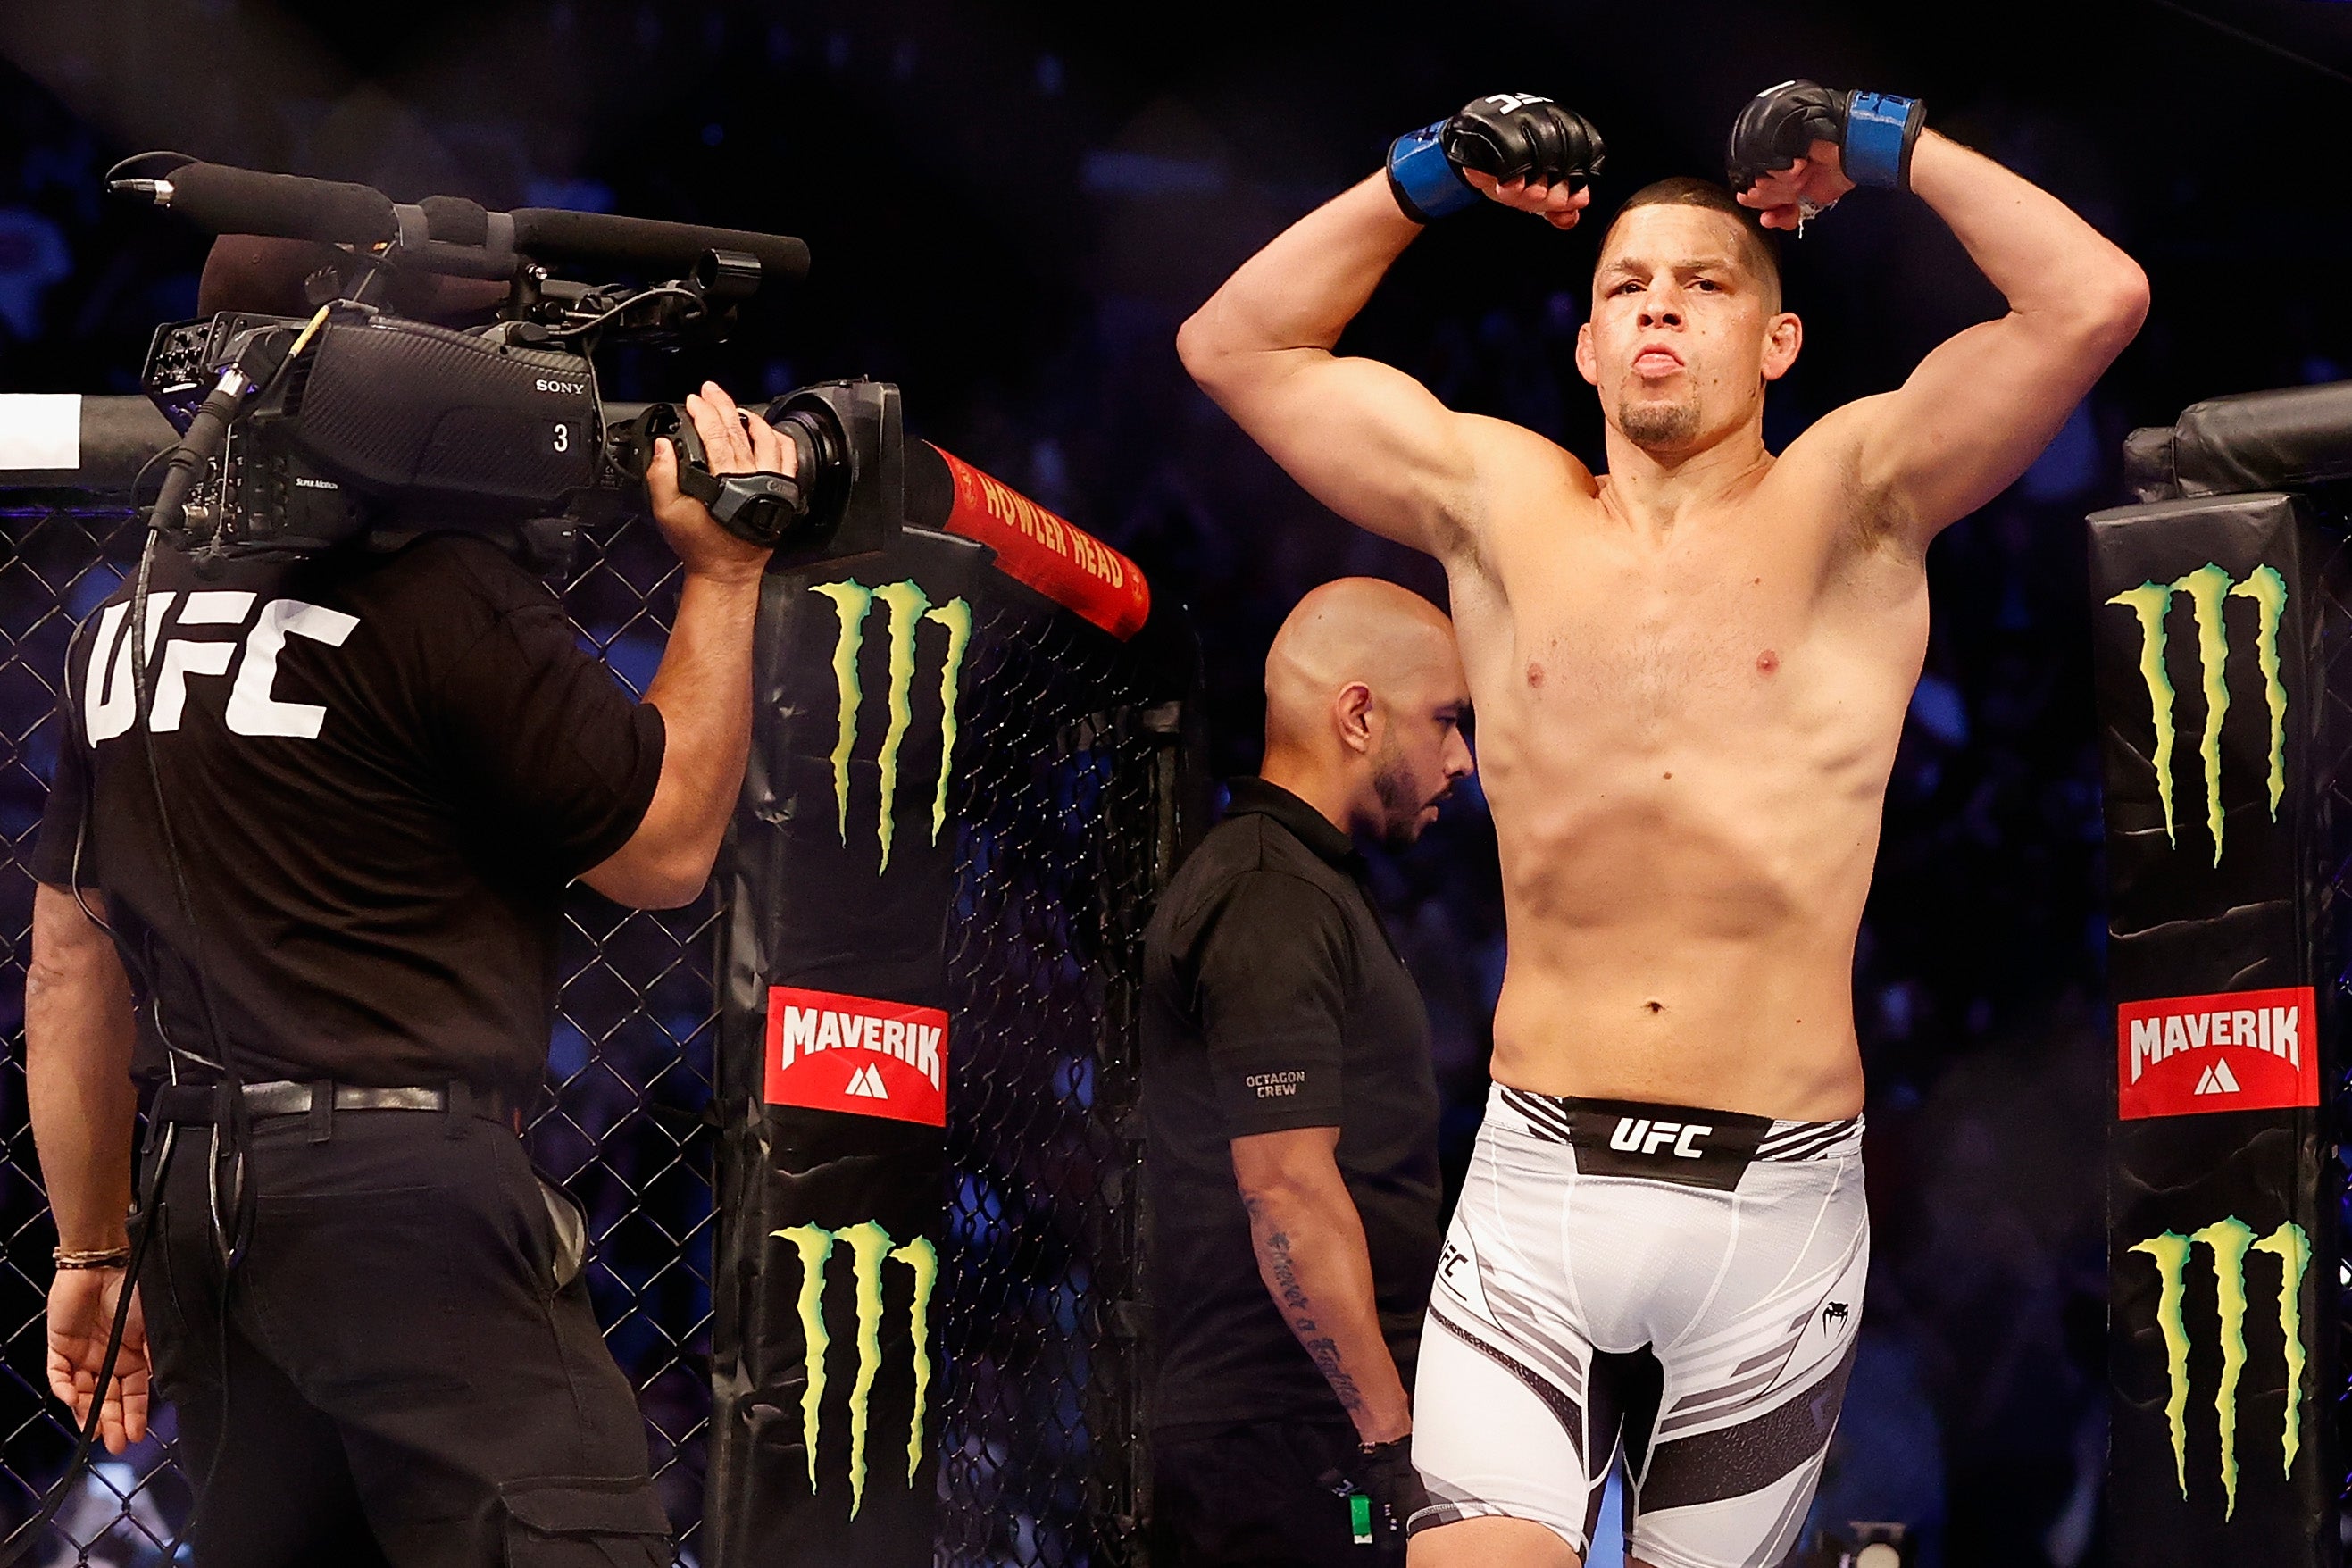 Nate Diaz’s last fight was a decision defeat by Leon Edwards in June 2021